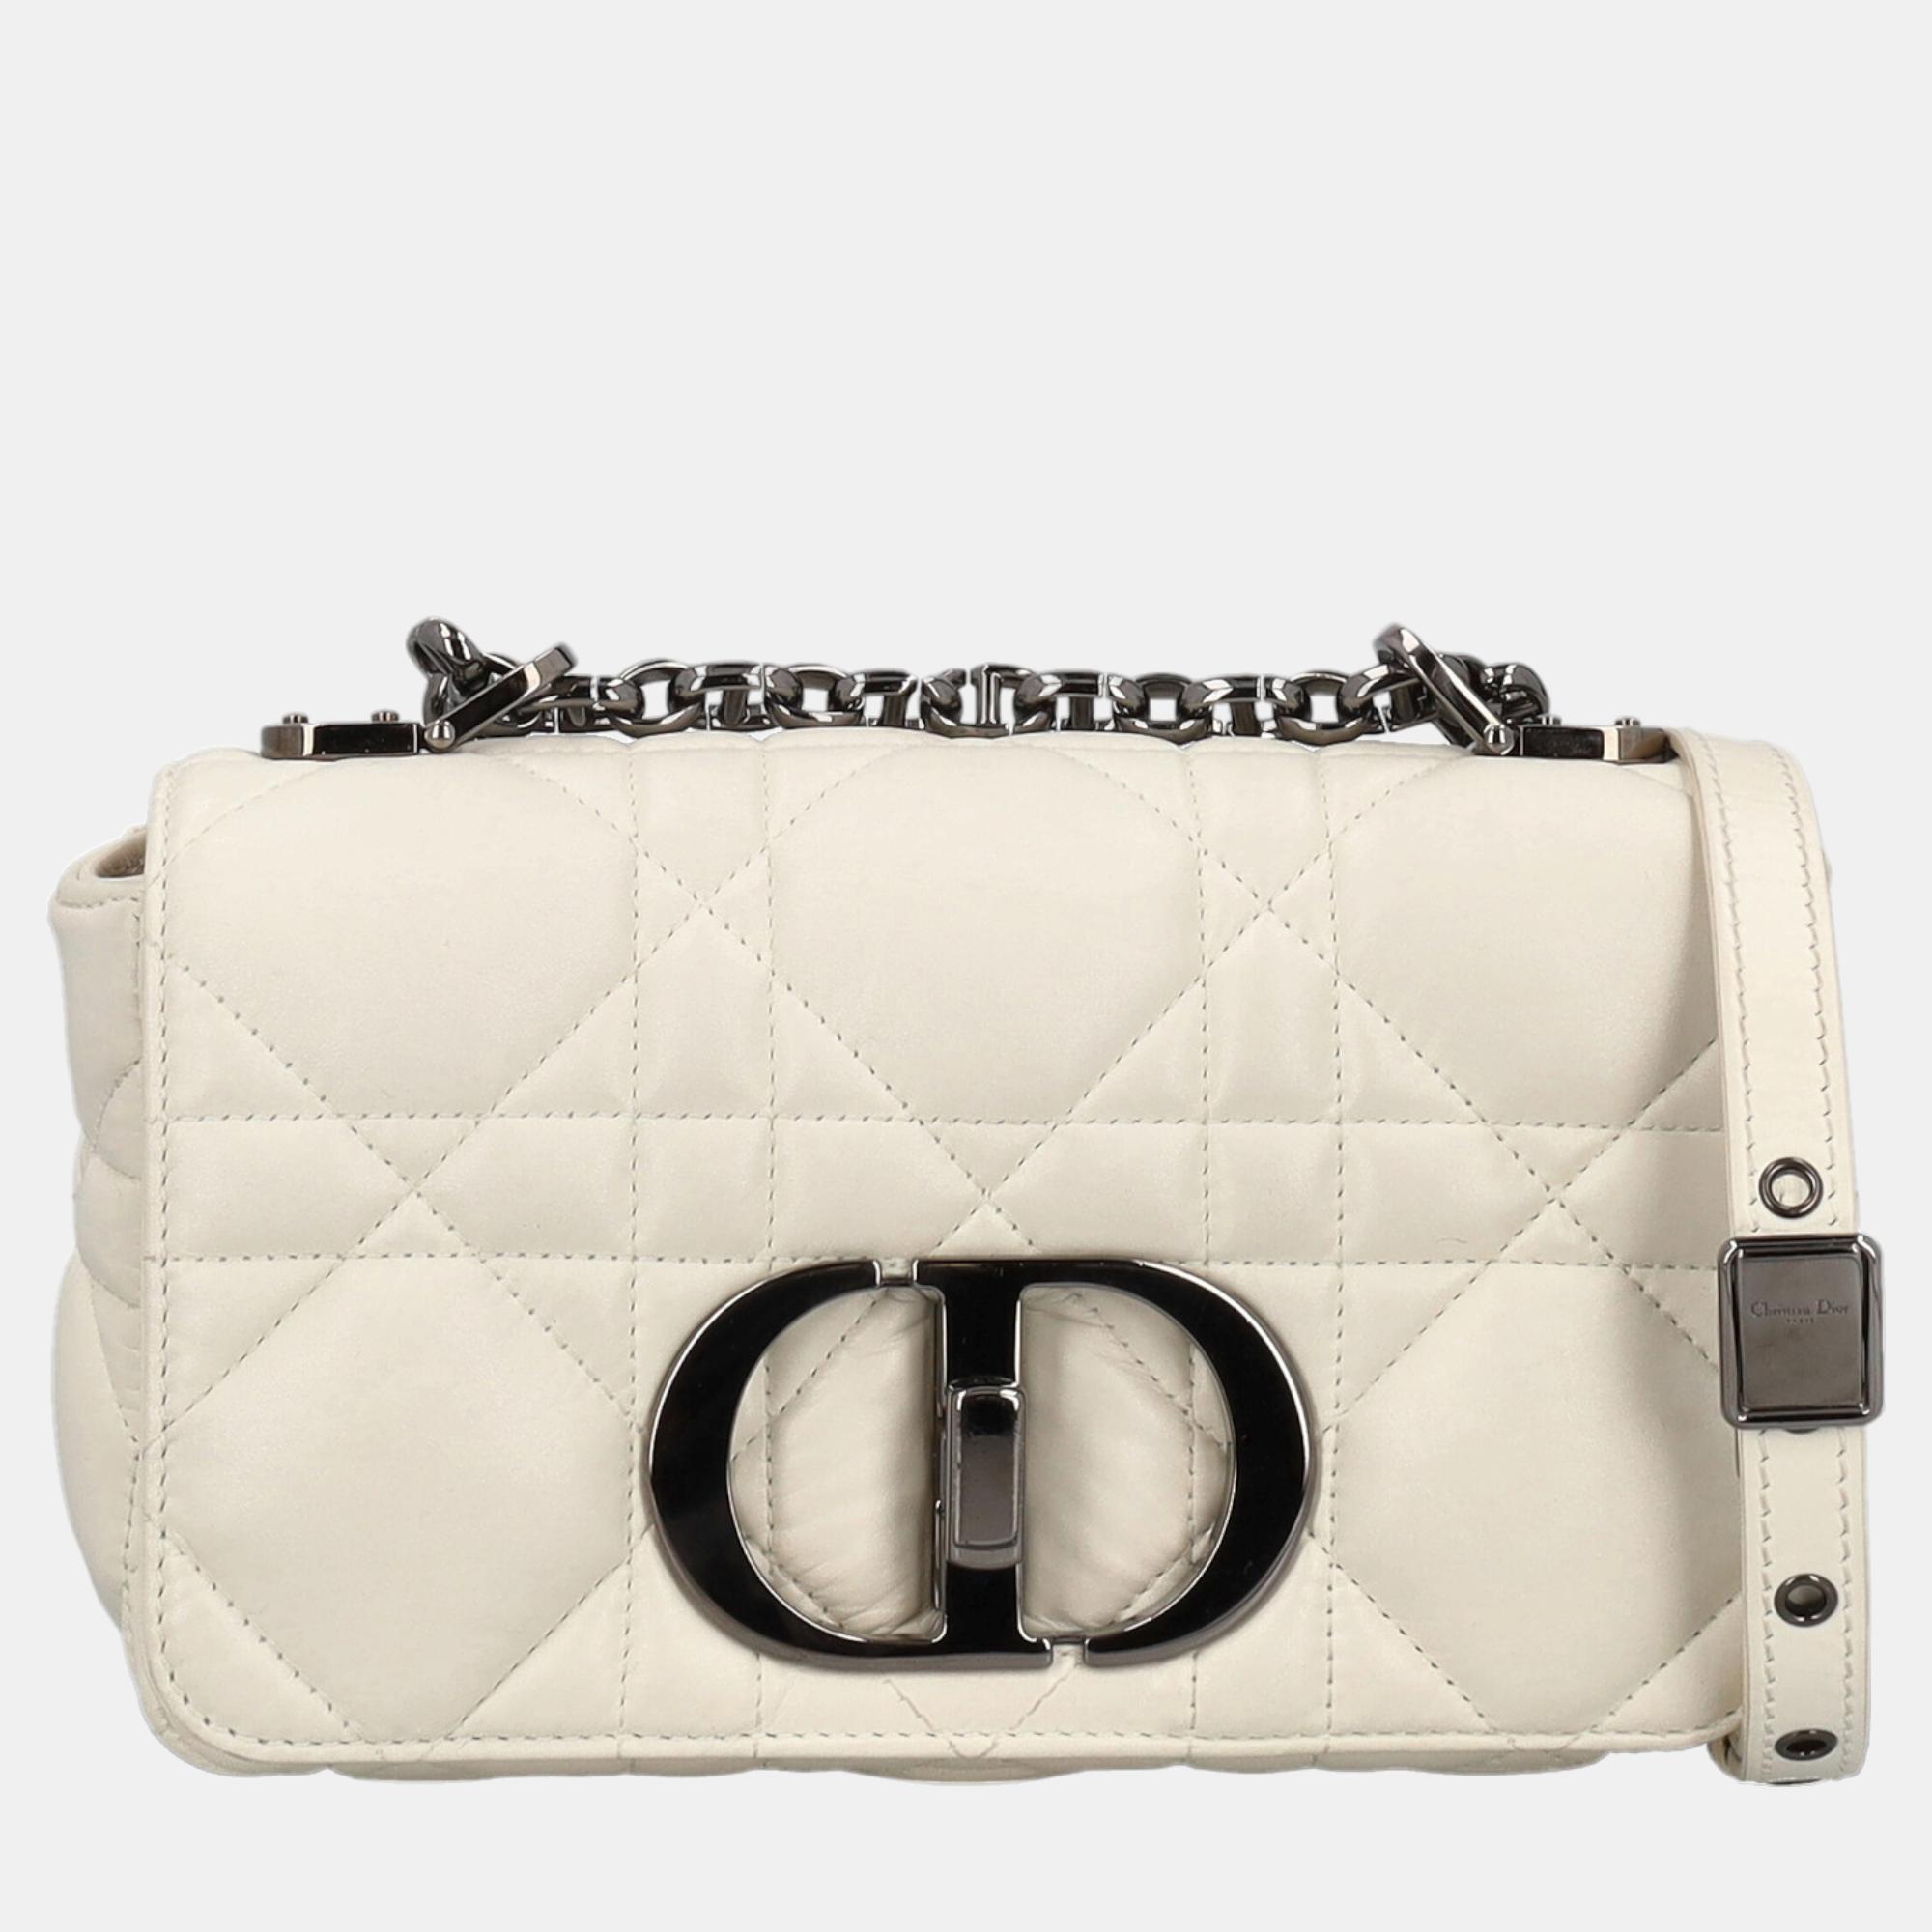 Dior Women's Leather Cross Body Bag - White - One Size